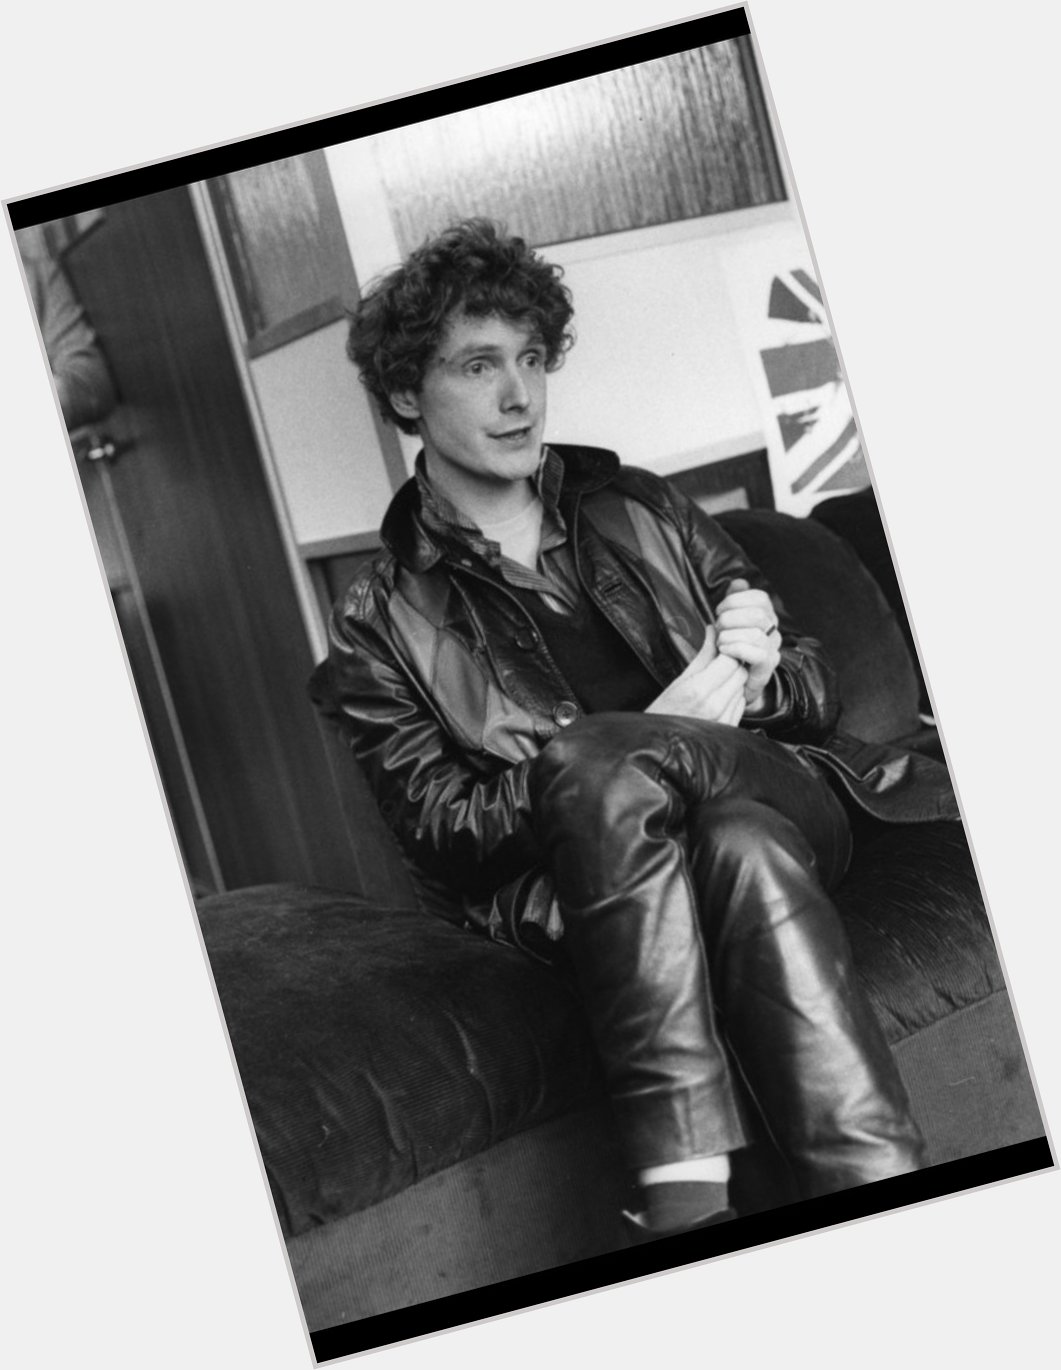 Happy Birthday, Malcolm McLaren! Without you there would have been no Sex Pistols. RIP 